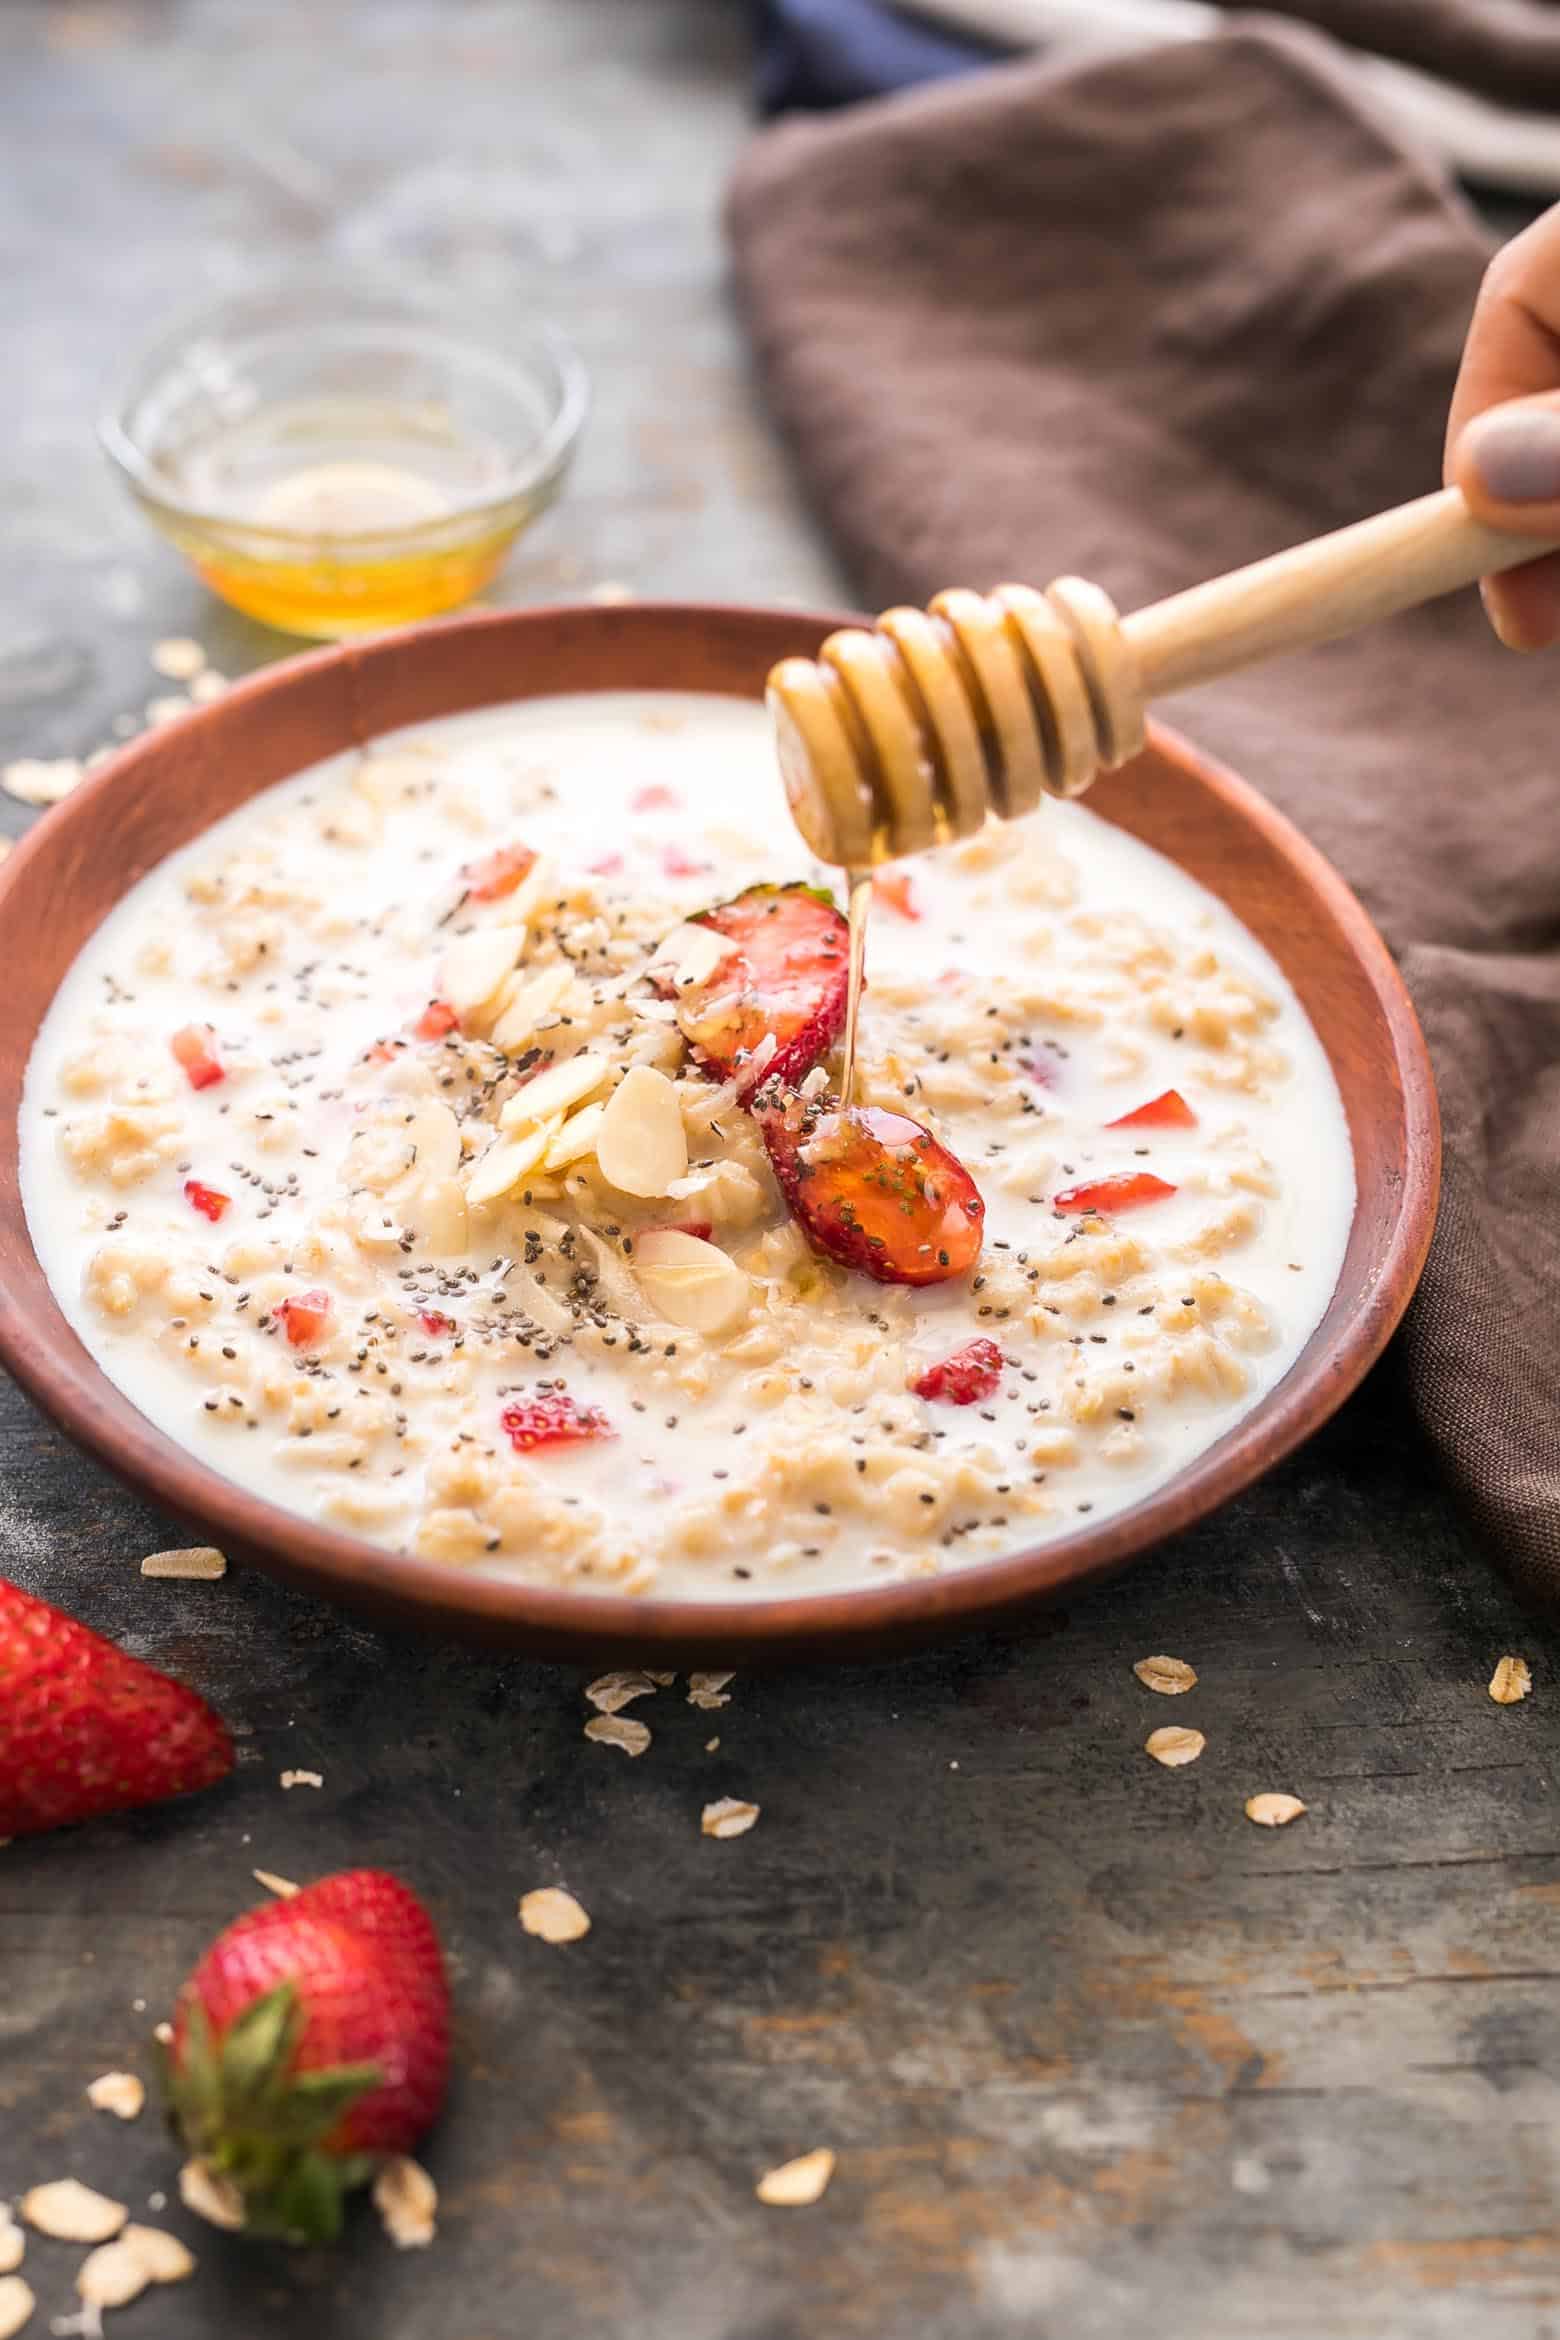 Healthy strawberries and cream breakfast oatmeal that is insanely delicious and tastes like your favourite cake, frosting and cupcake - all rolled into one! YUM!